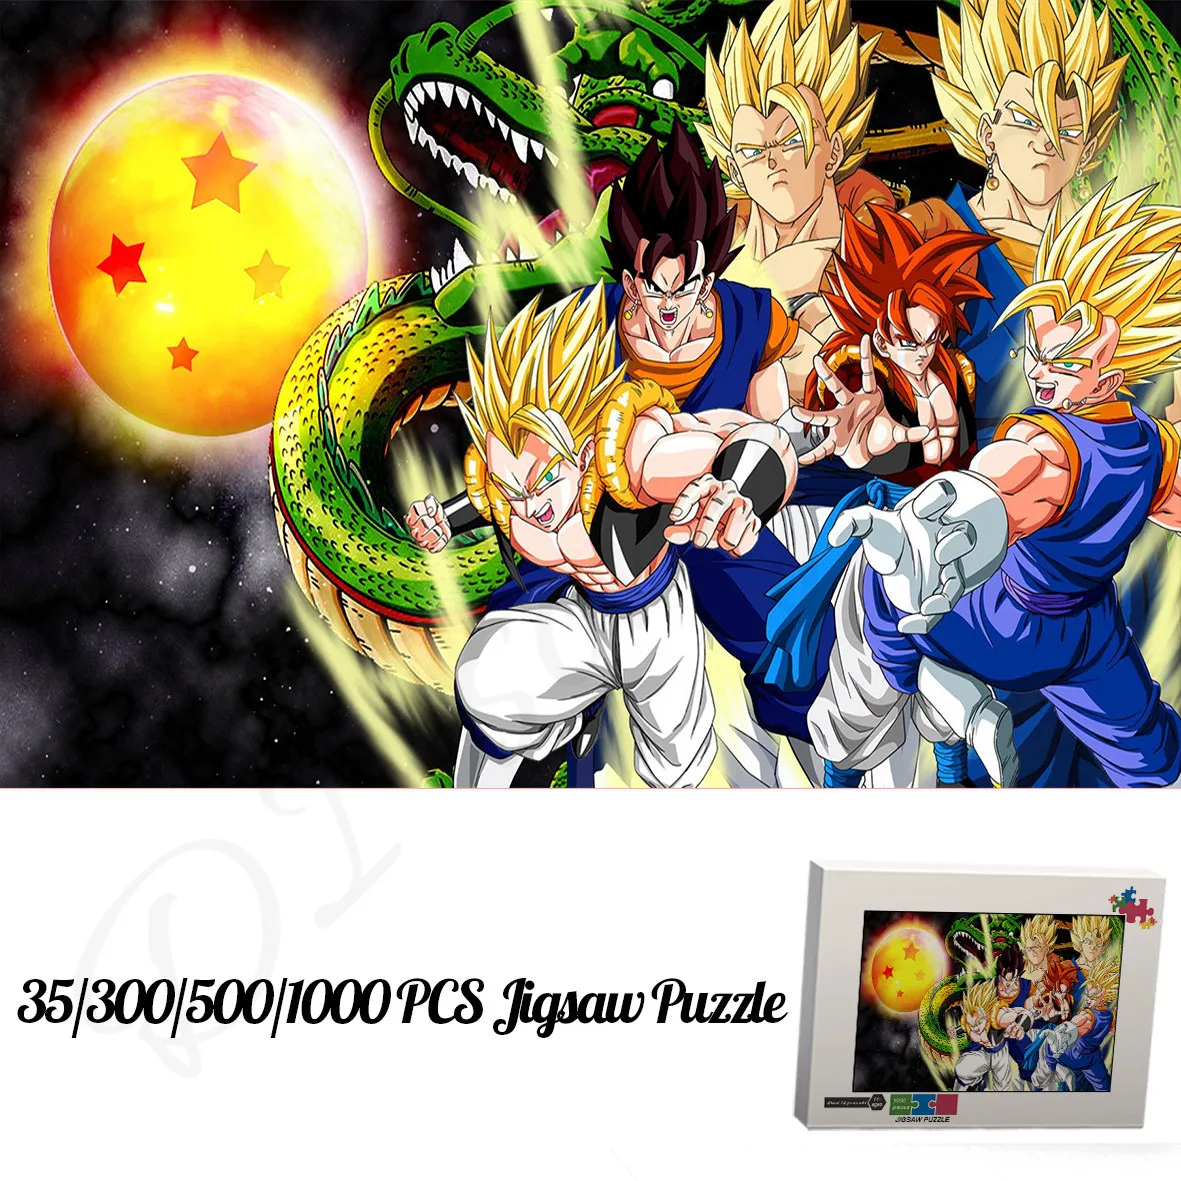 Dragon Ball Main Characters Cartoon Jigsaw Puzzles Classic Japanese Anime 300 500 1000 Pieces Wooden Box Puzzle Educational Gift